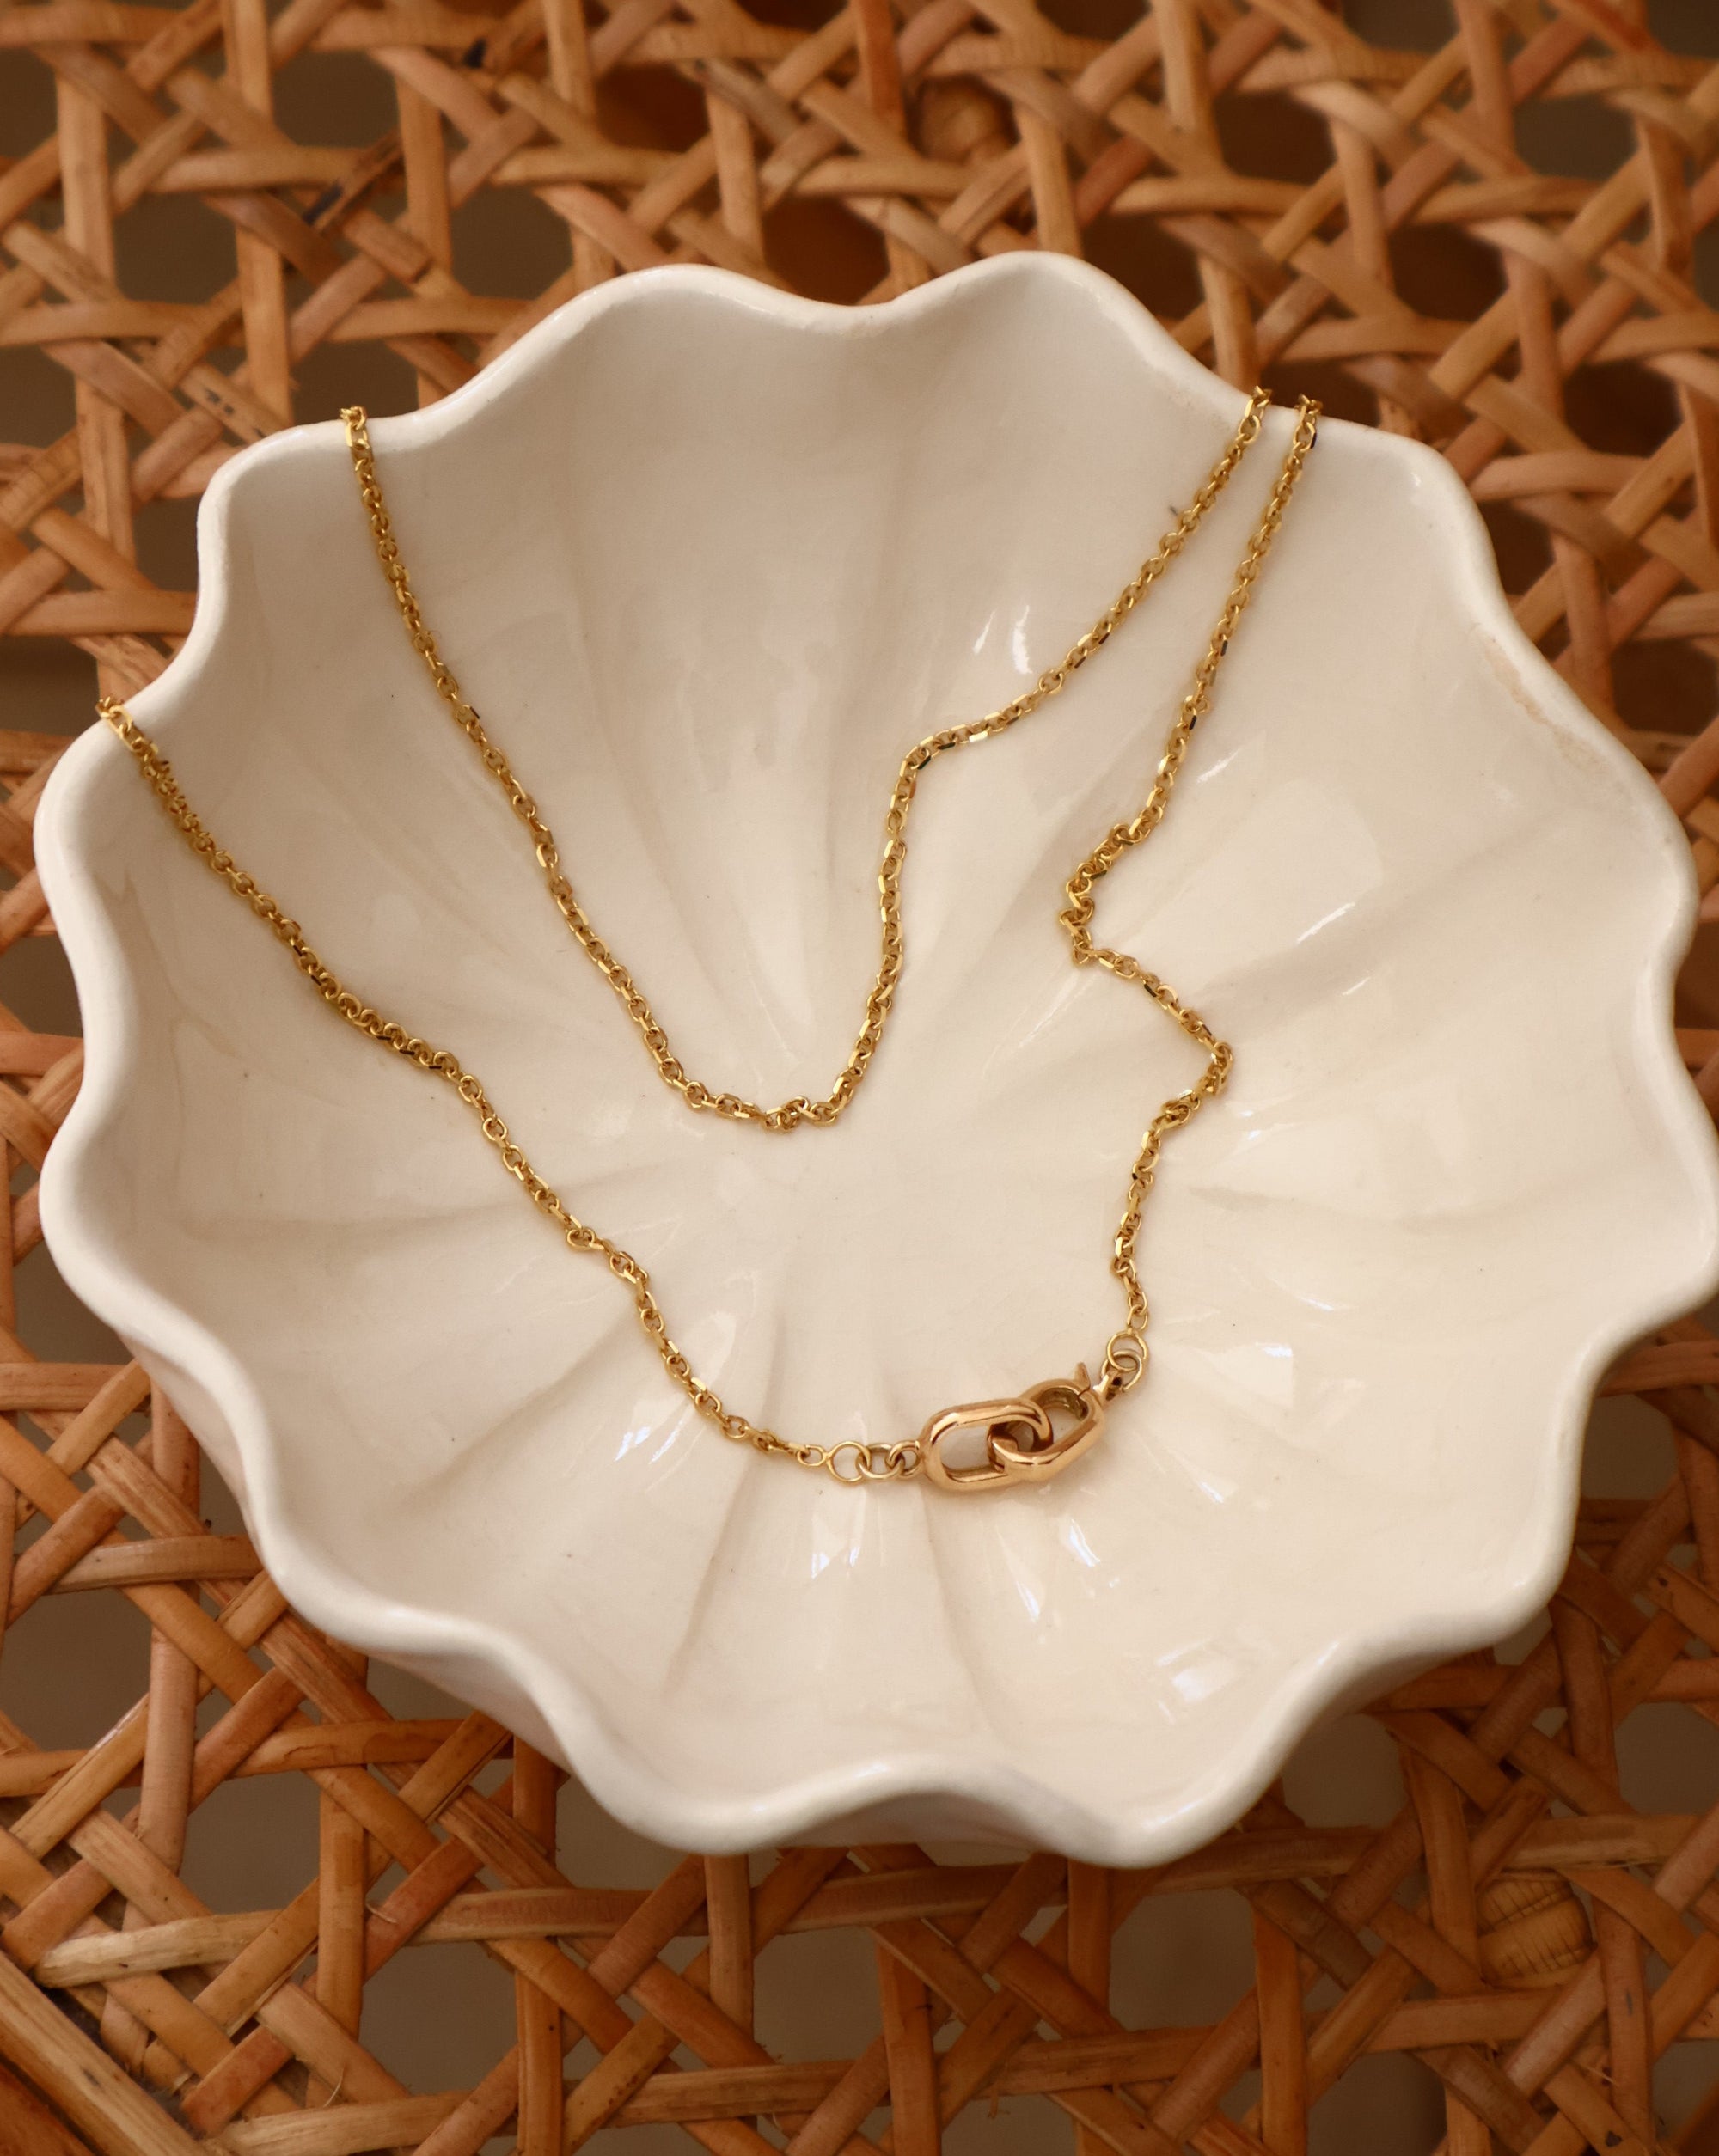 14k gold necklace in a white shell dish on a wicker chair